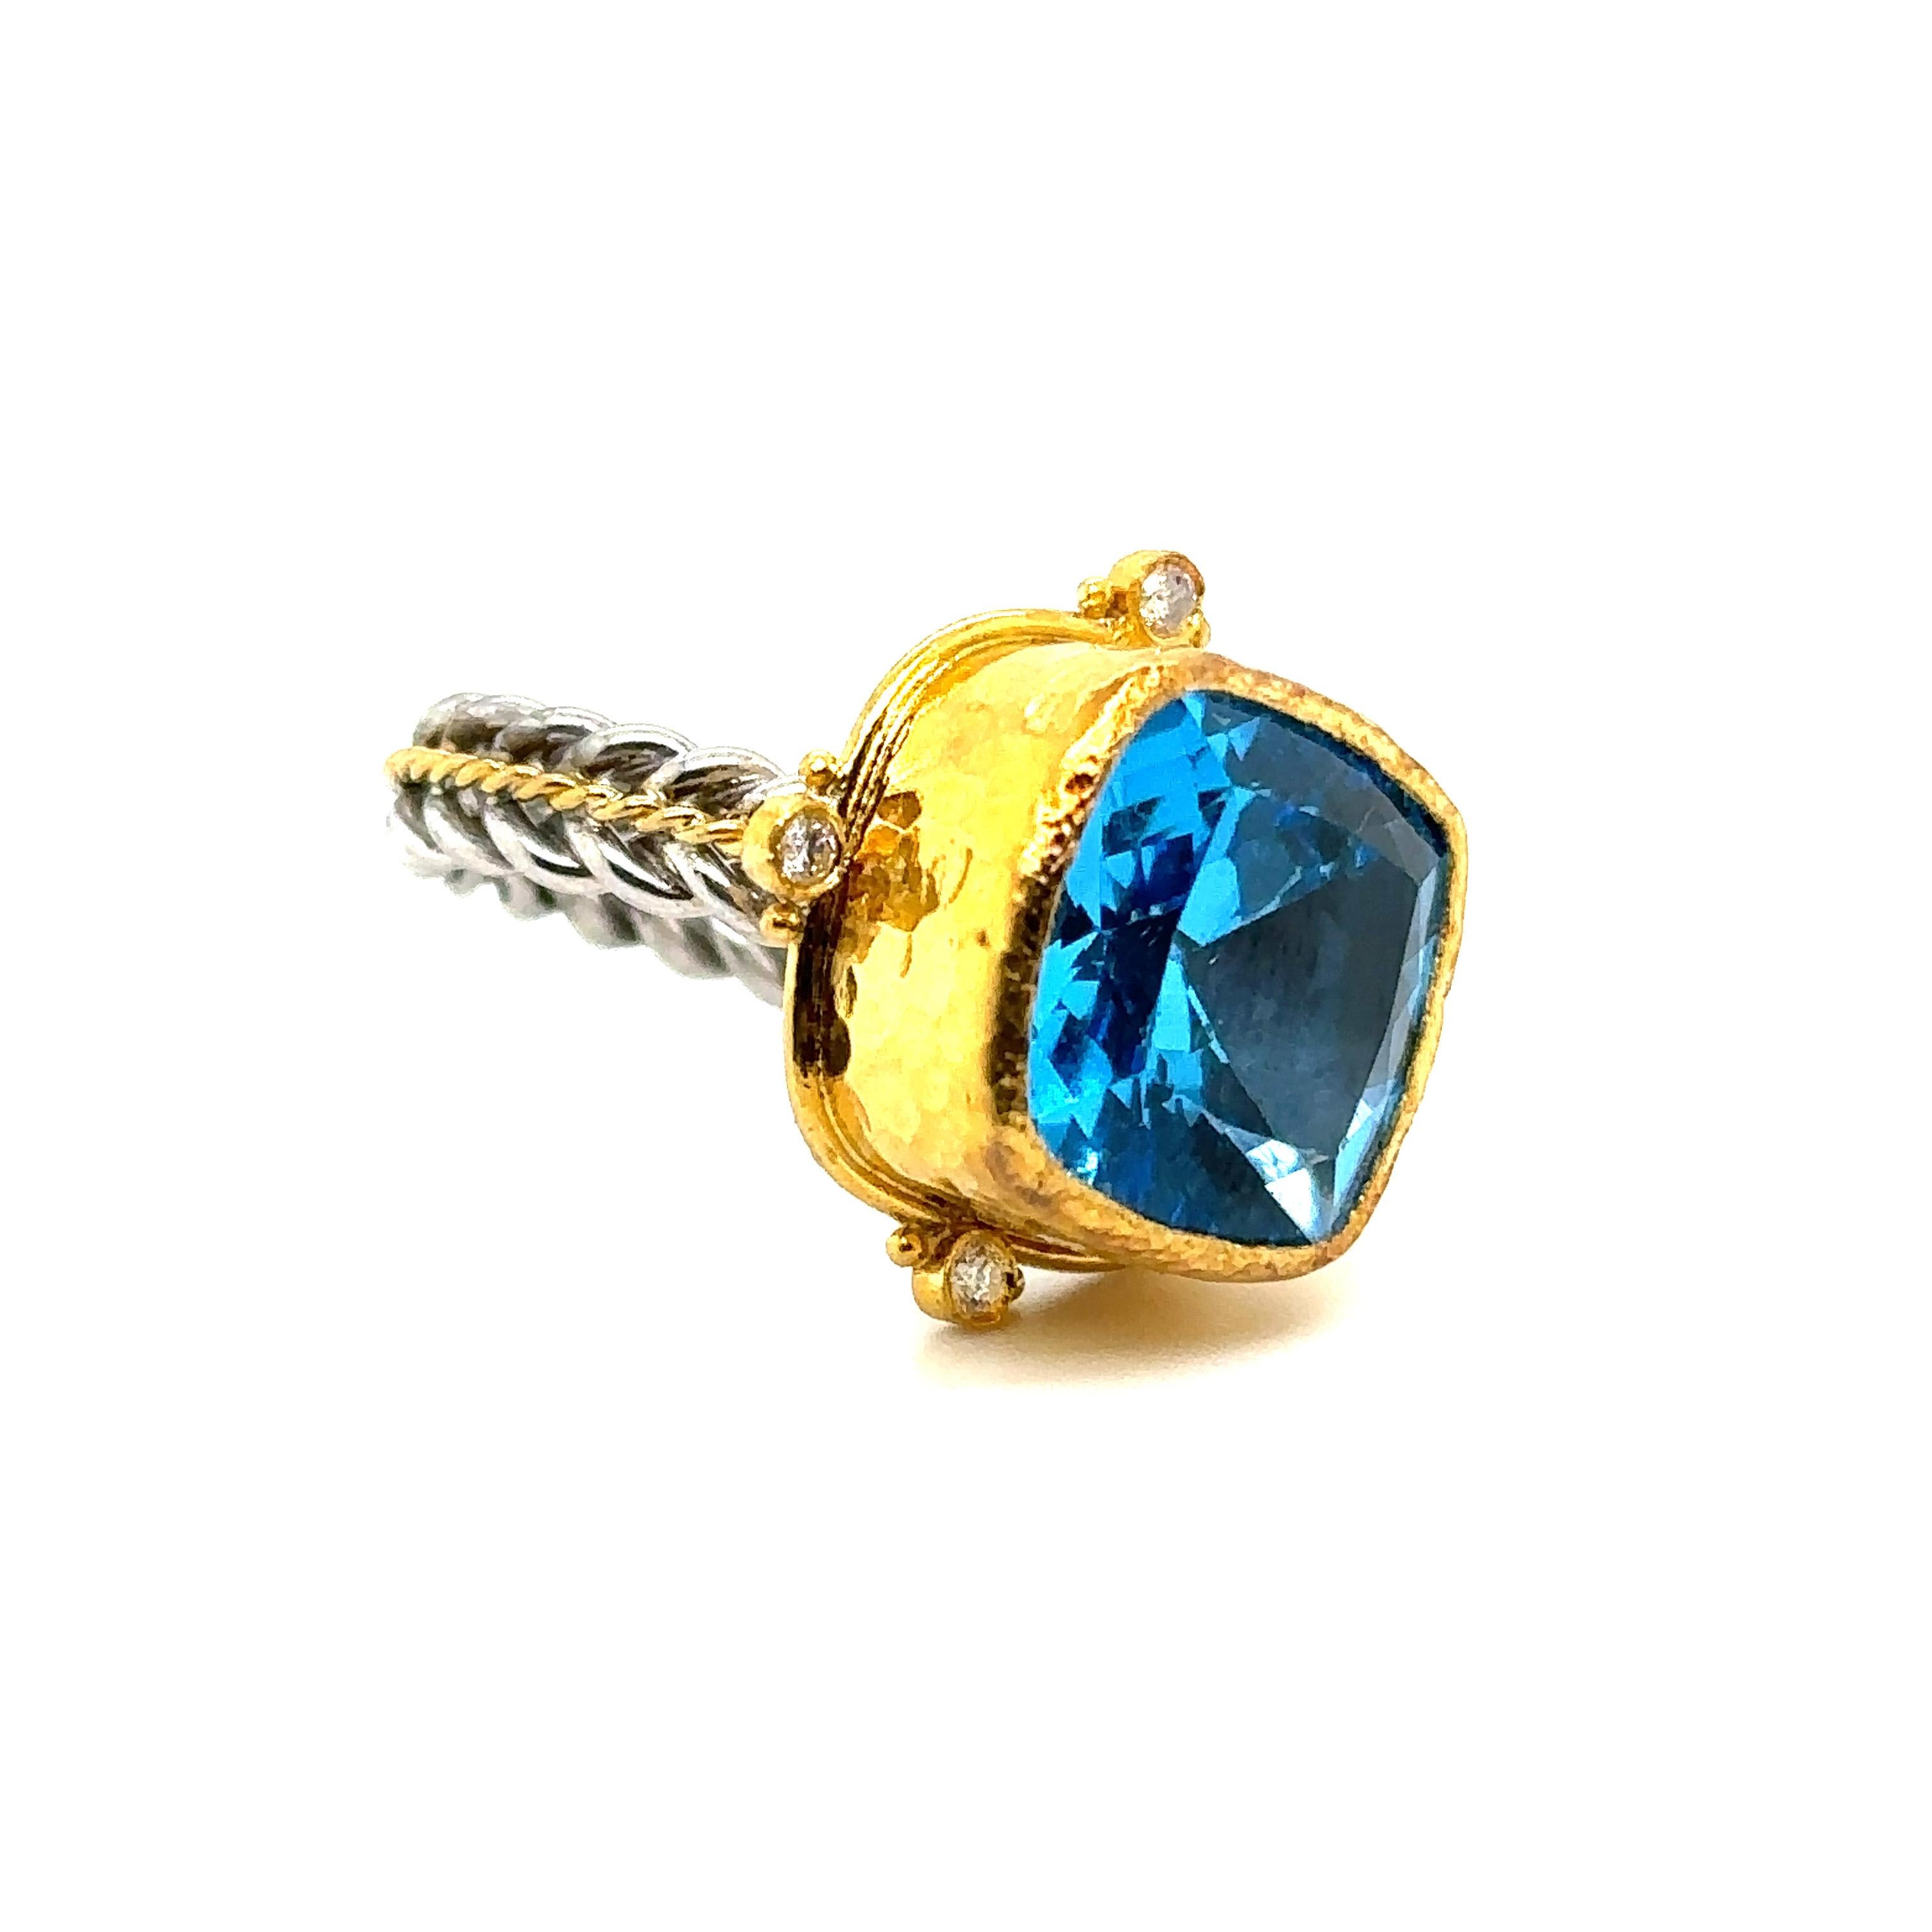 JAS-19-1995 - 24K GOLD/STERLING SILVER RING 0.10Ct DIAS.  For Sale 3